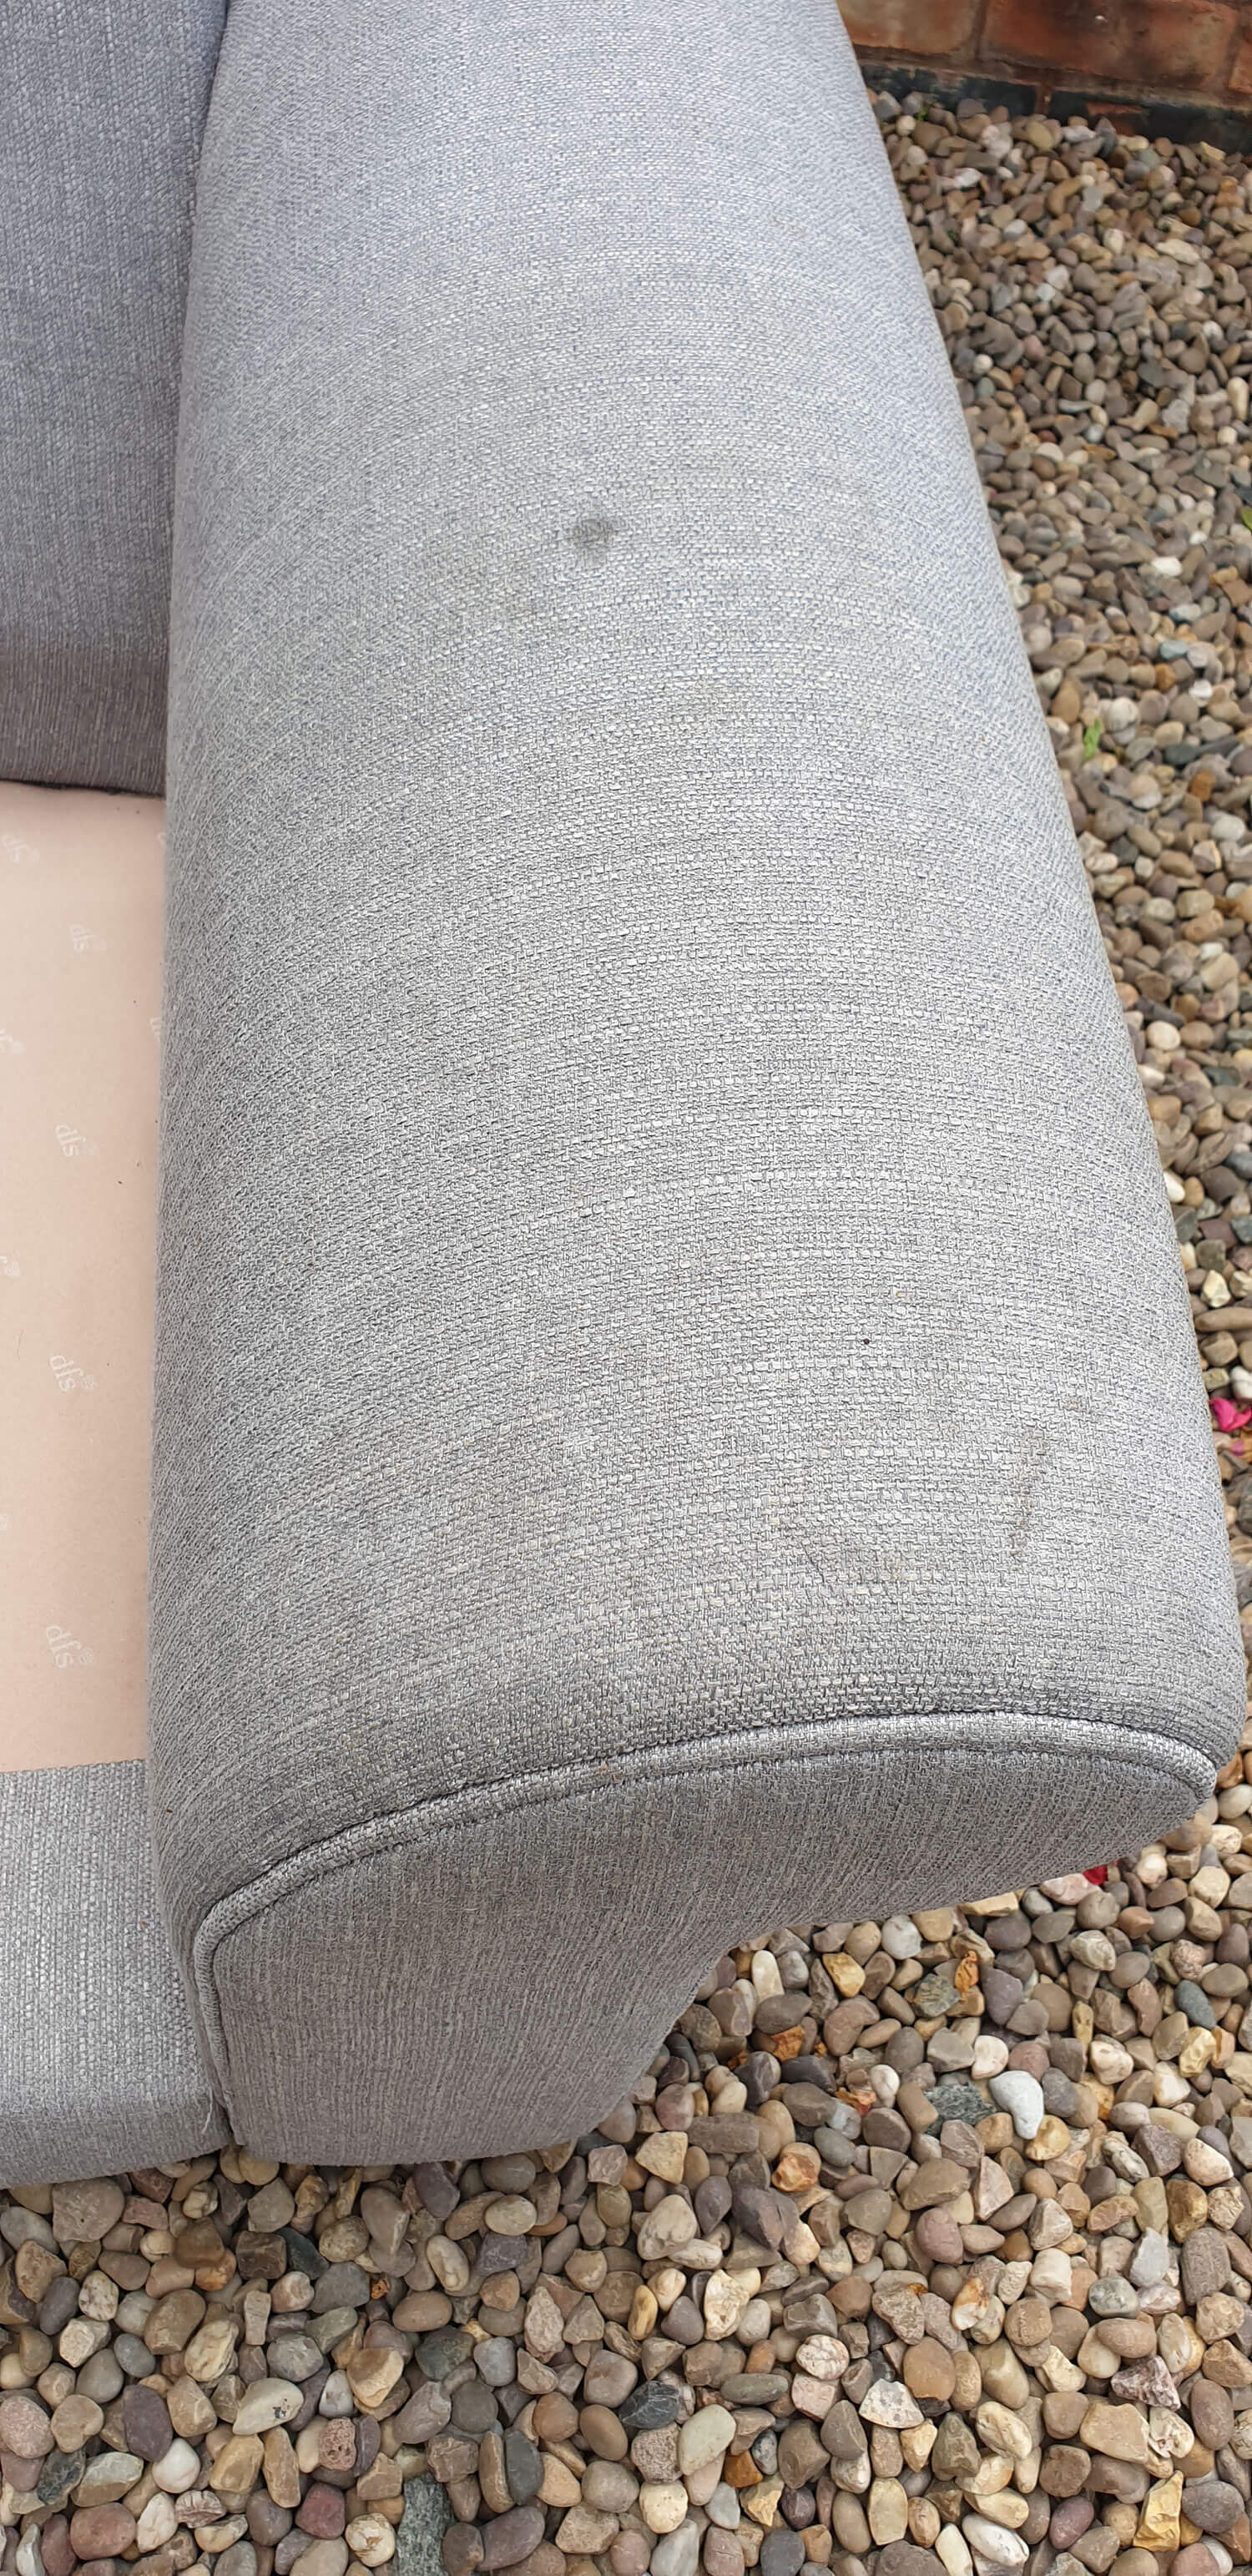 Upholstery before cleaning